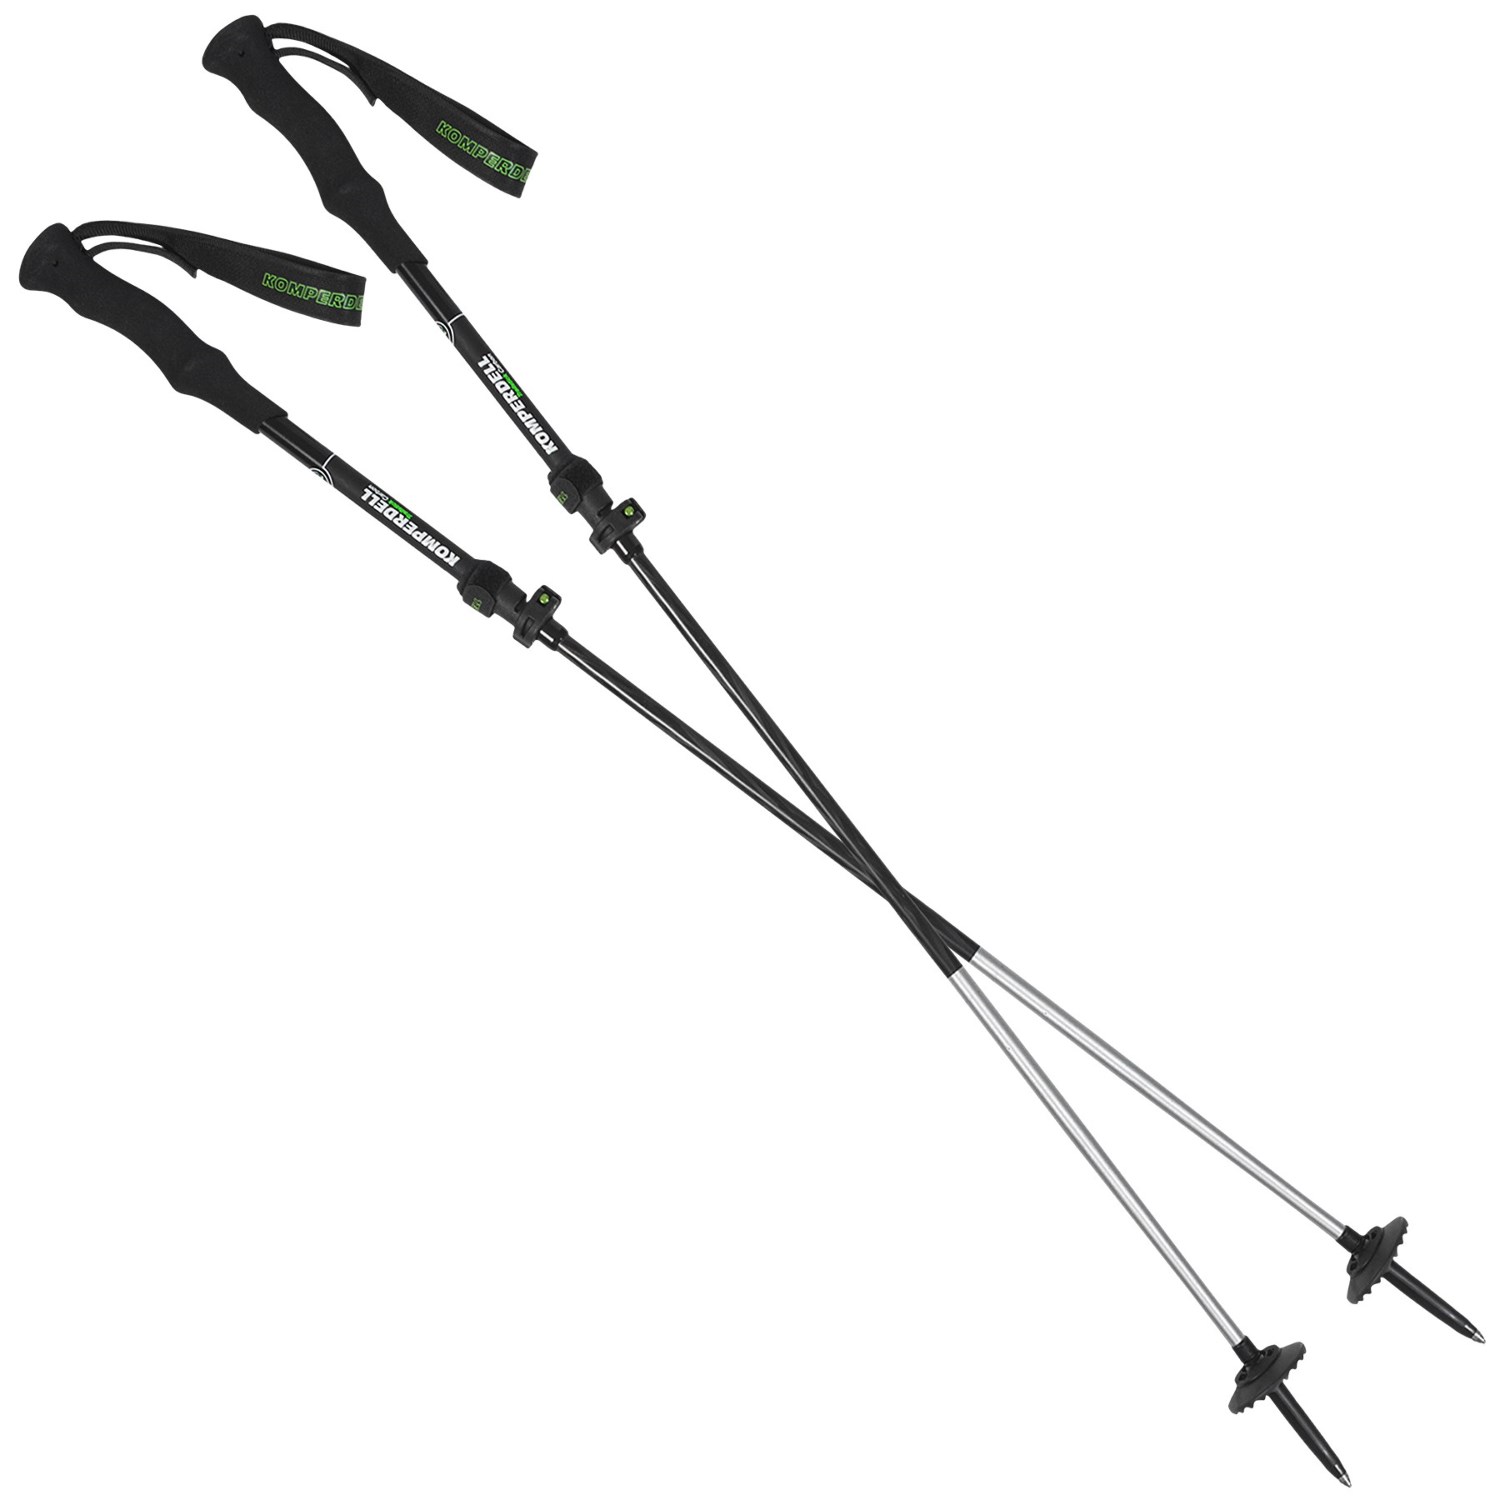 Komperdell has a new fast and light foldable carbon pole